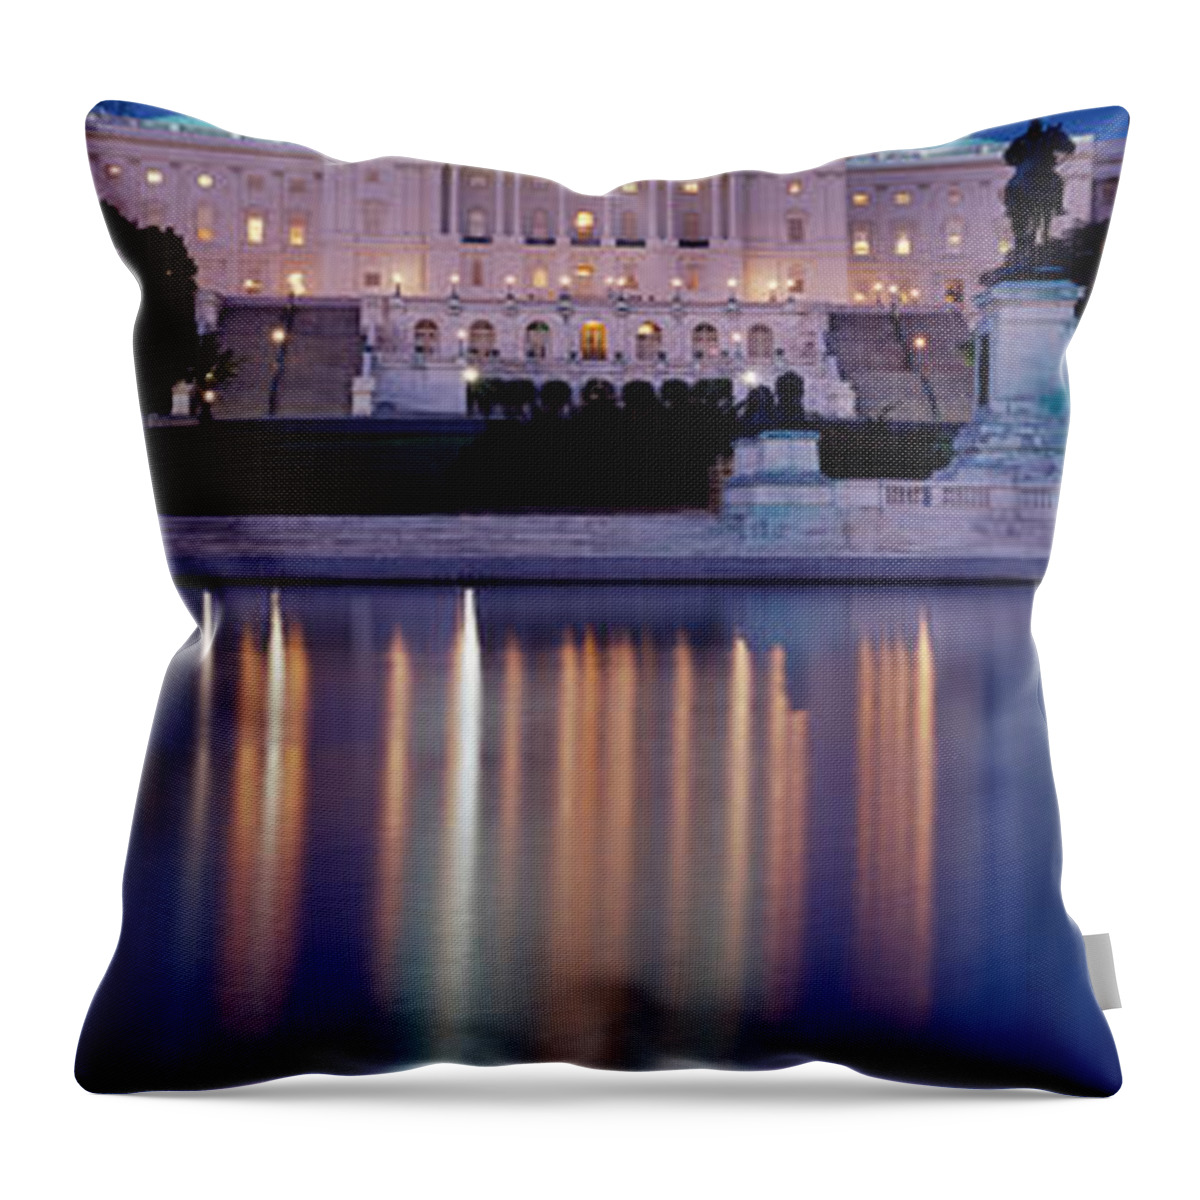 Photography Throw Pillow featuring the photograph Reflection Of A Government Building #3 by Panoramic Images